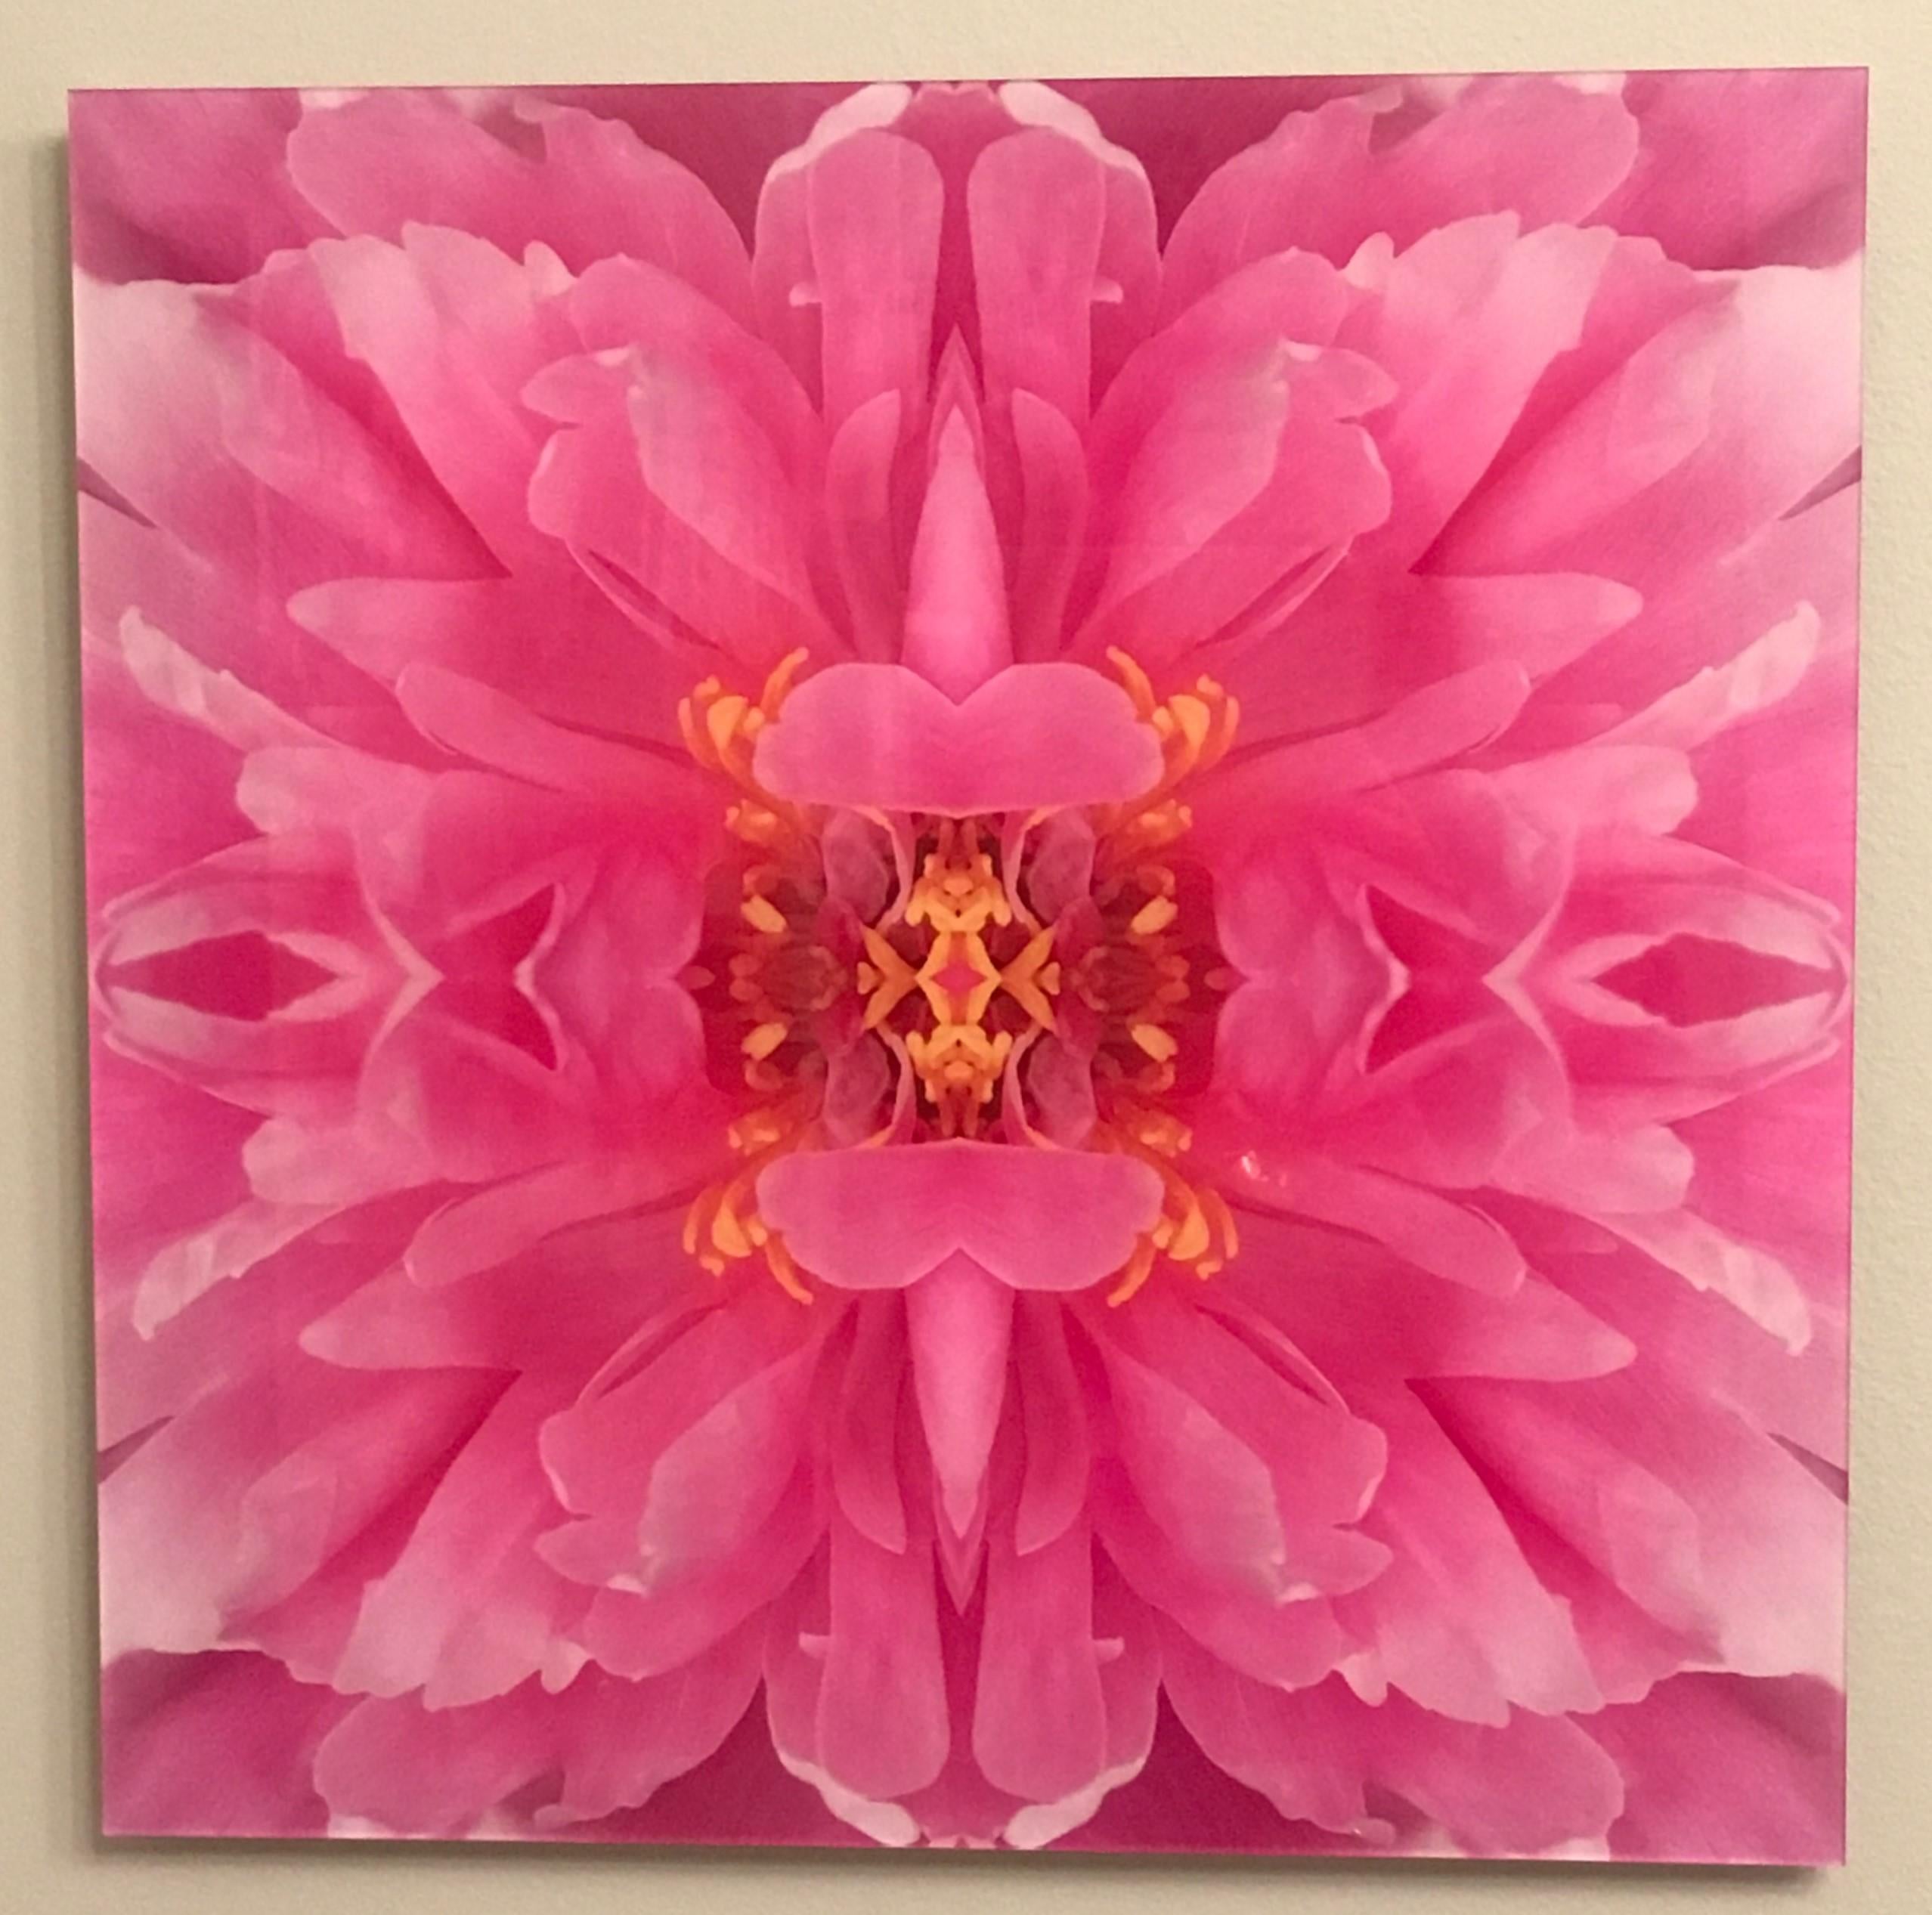 Rebecca Swanson, Pure Poppy I, Limited Edition Photograph, 15x15.  It is available with Plexifacemount or white frame .  This stunning image is filled Pink and green.  This is an edition of 15.  Also available in 30x30.   Printing and framing upon